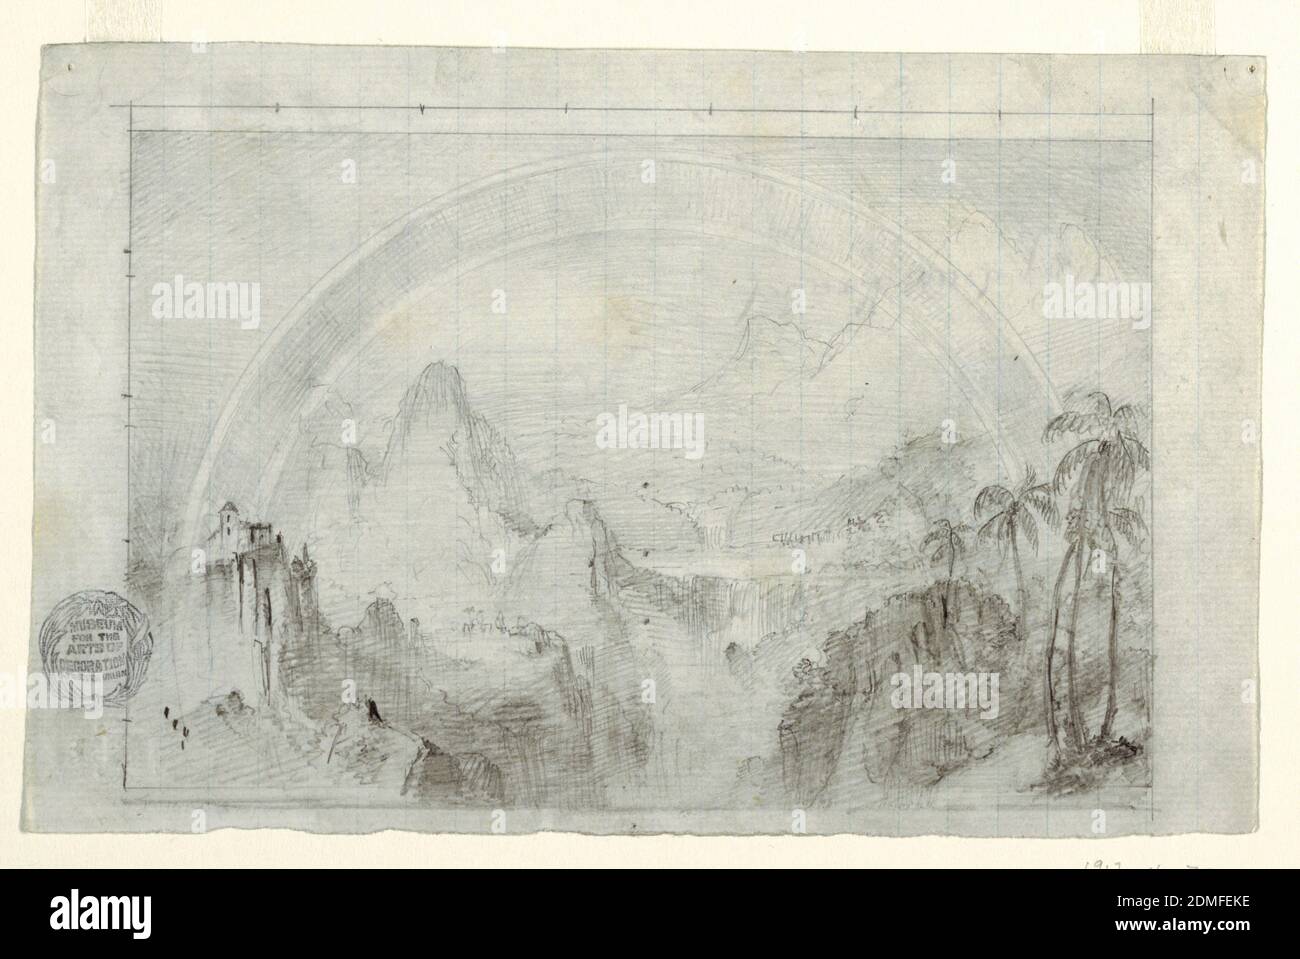 Study for 'Rainy Season in the Tropics', Frederic Edwin Church, American, 1826–1900, Graphite on paper, ruled with parallel lines in blue ink, border lines in graphite, on white paper, Recto: Horizonal view showing a dramatic panorama of towering peaks flanking a river gorge, with a church ( or castle) perched atop a cliff at the left and a cluster of palm trees at the right, bridged by a prominent double rainbow., Verso: Elevations and plans for a Mansard-roofed house are shown in boxes and sometimes numbered: shown vertically at bottom is the house standing at a declivity Stock Photo